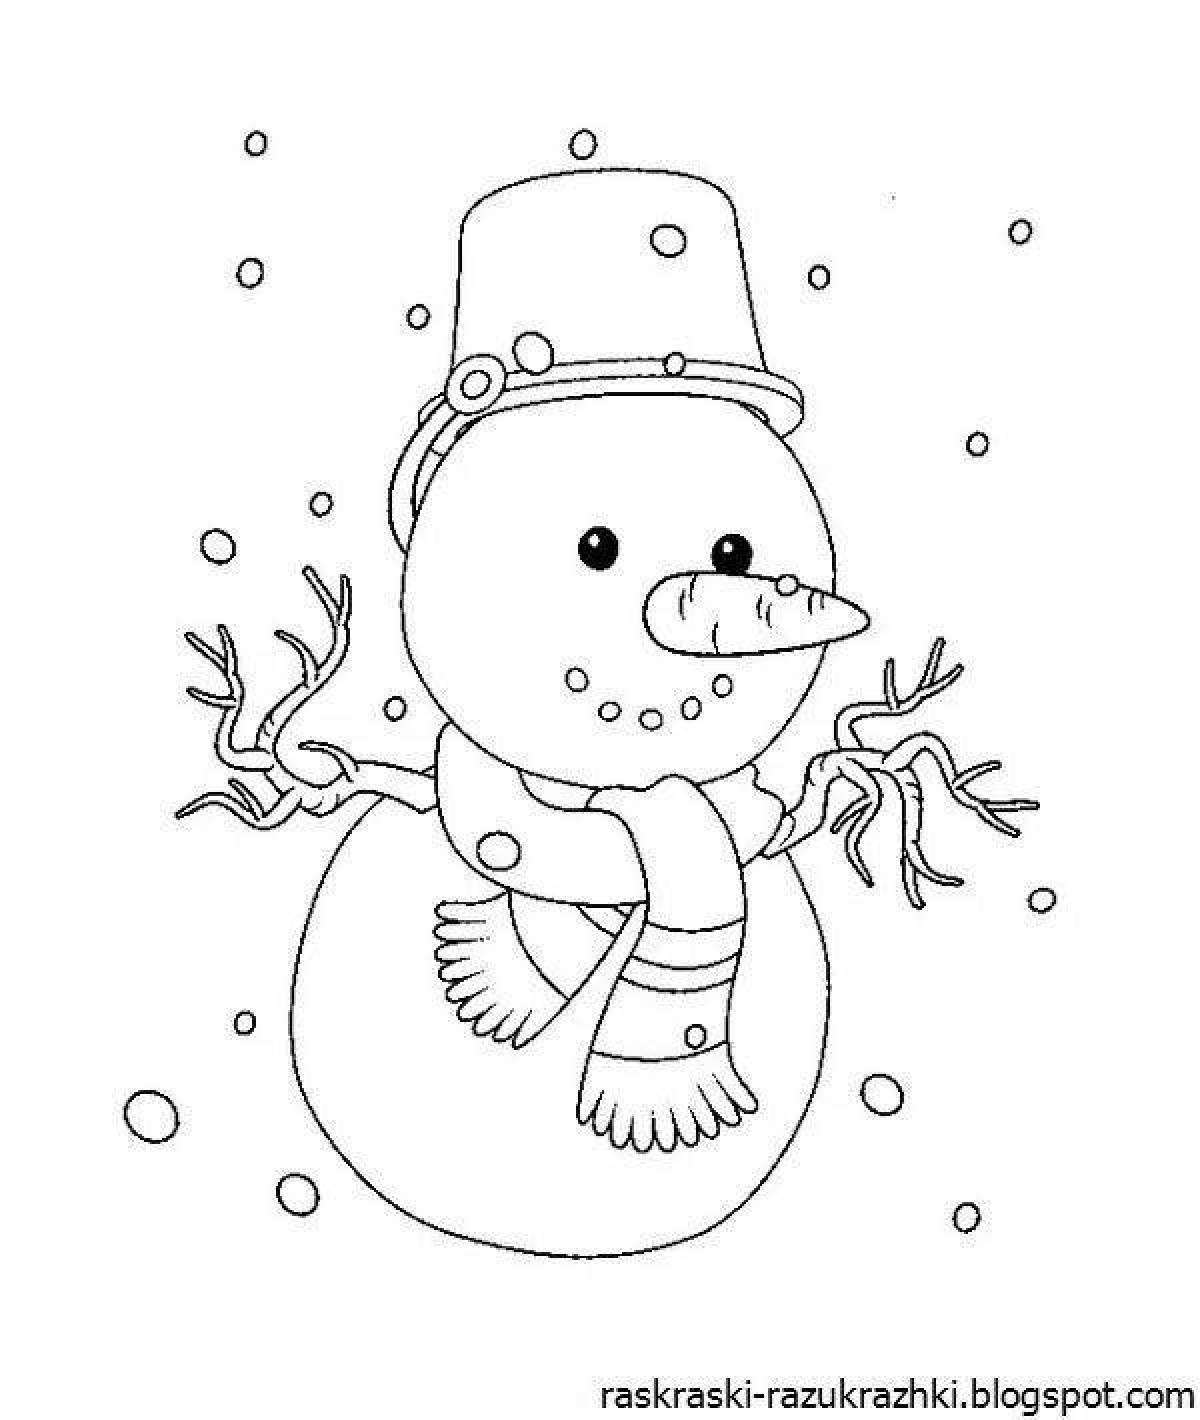 Great snowman coloring book for kids 6-7 years old